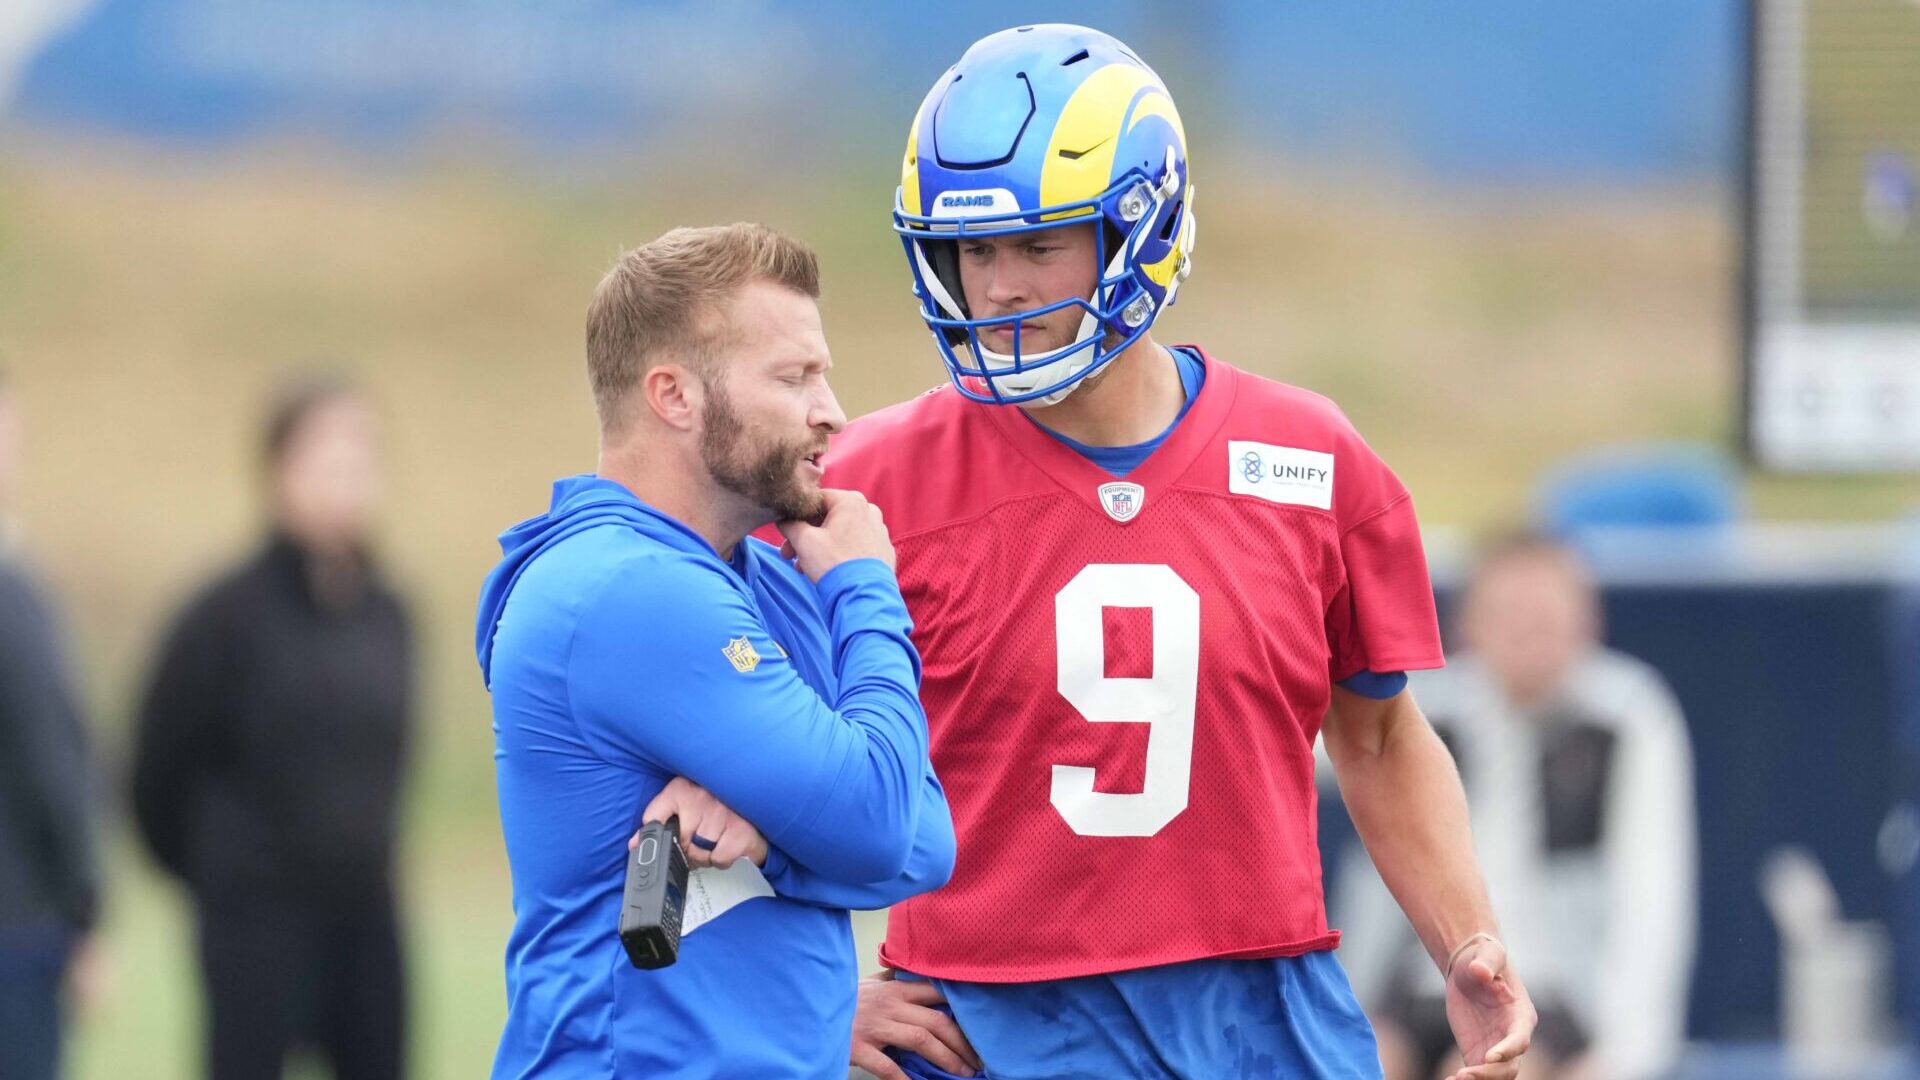 Los Angeles Rams head coach Sean McVay and quarterback Matthew Stafford, in a red practice jersey, talk on the sideline of the team's minicamp.